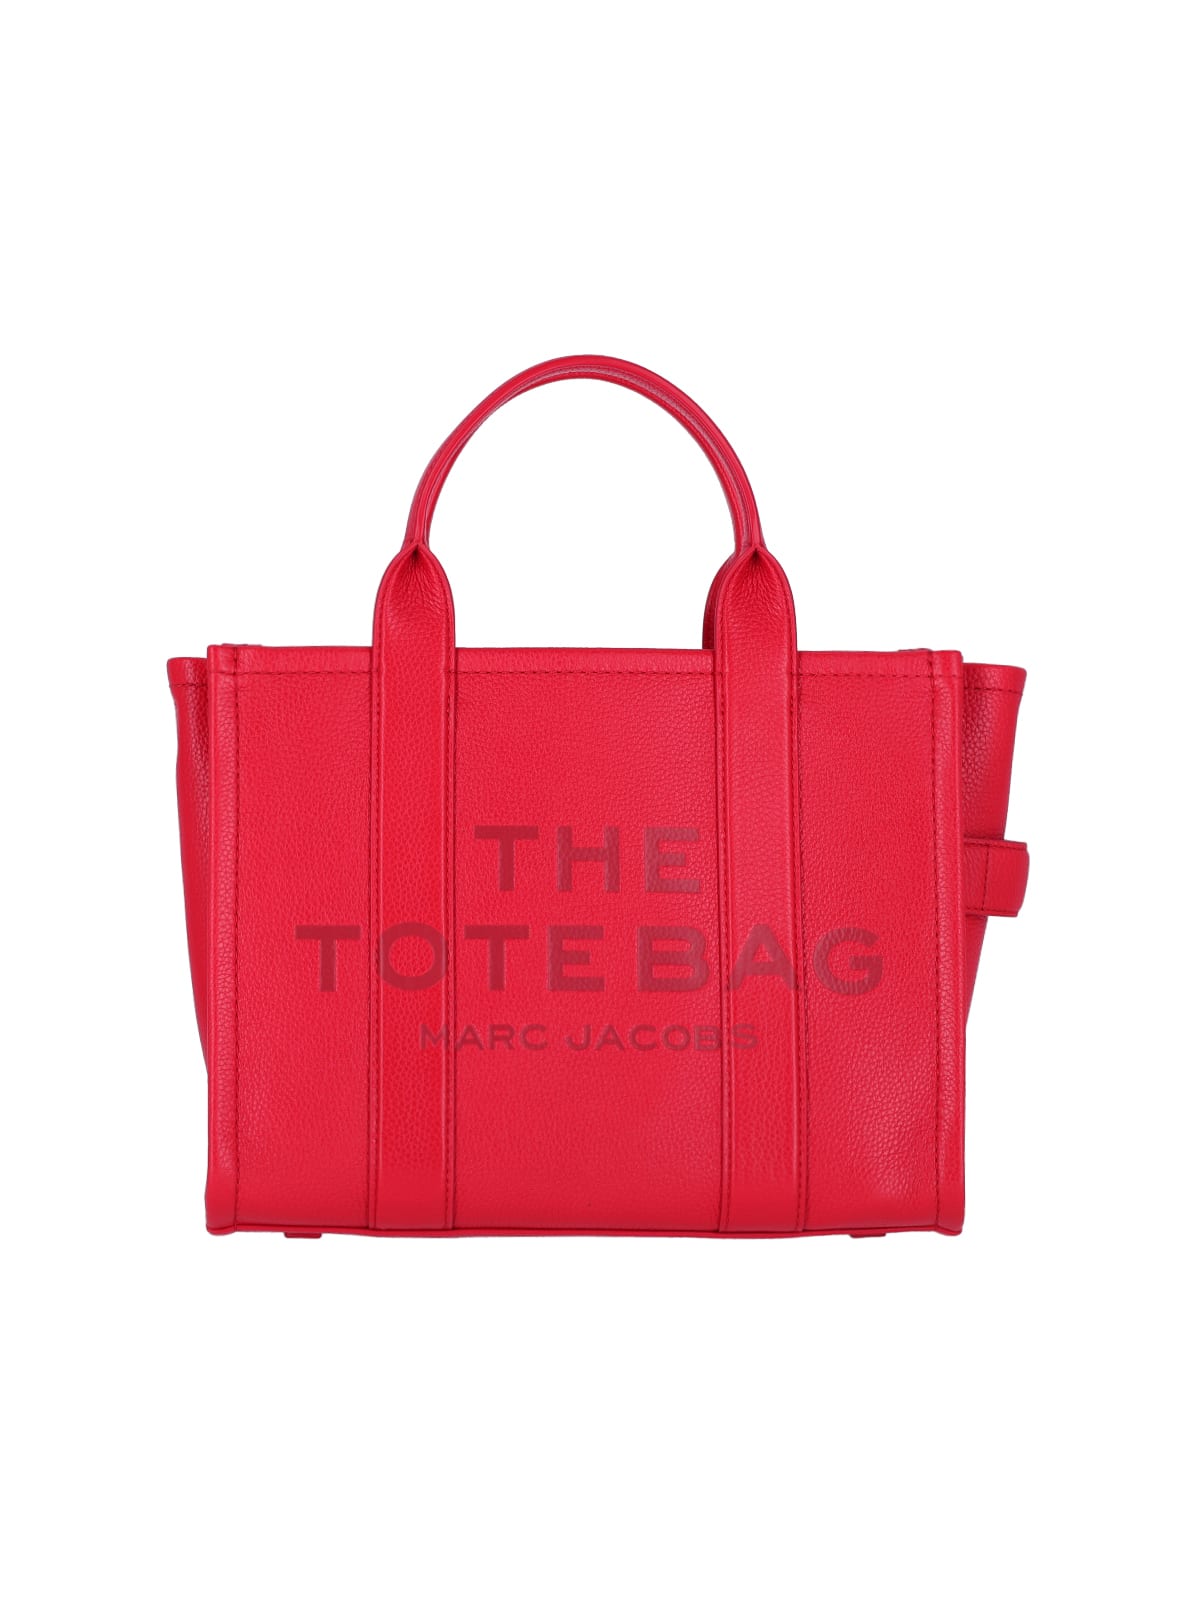 Marc Jacobs The Medium Tote Bag In Red